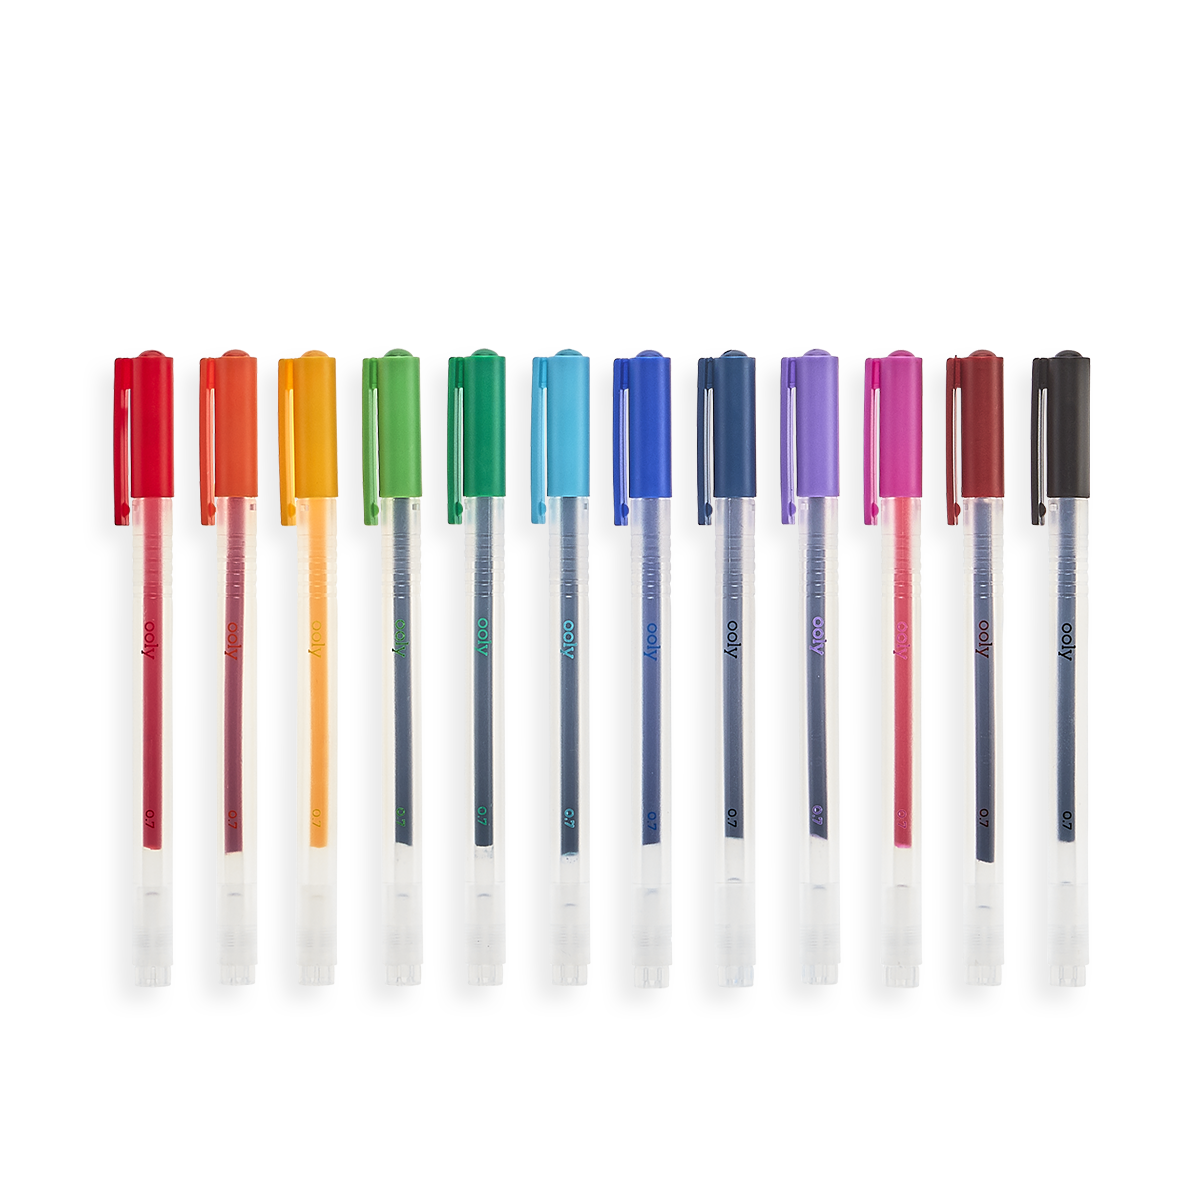 Creative Writing Pen Colored Pens For Note Taking Cool Pens For